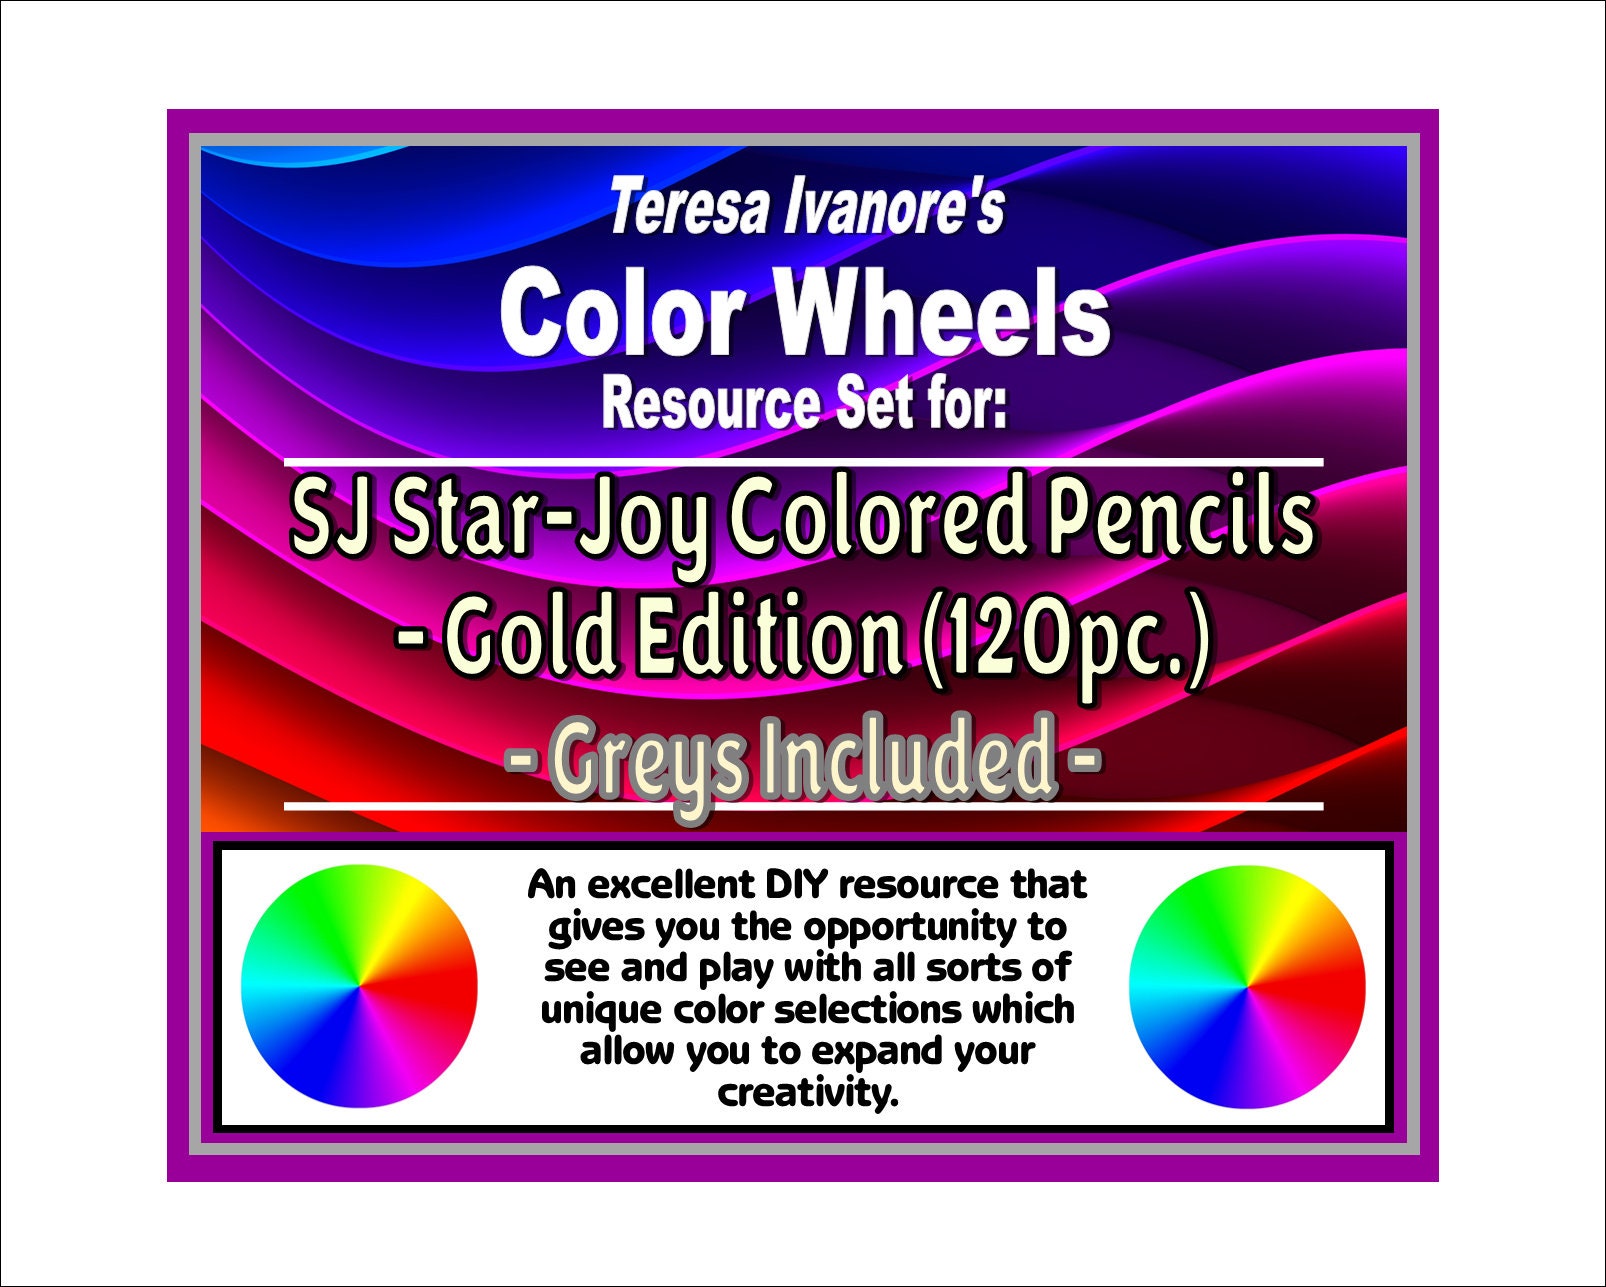 SJ STAR-JOY Gold Edition 120 Colored Pencils for Adult Coloring